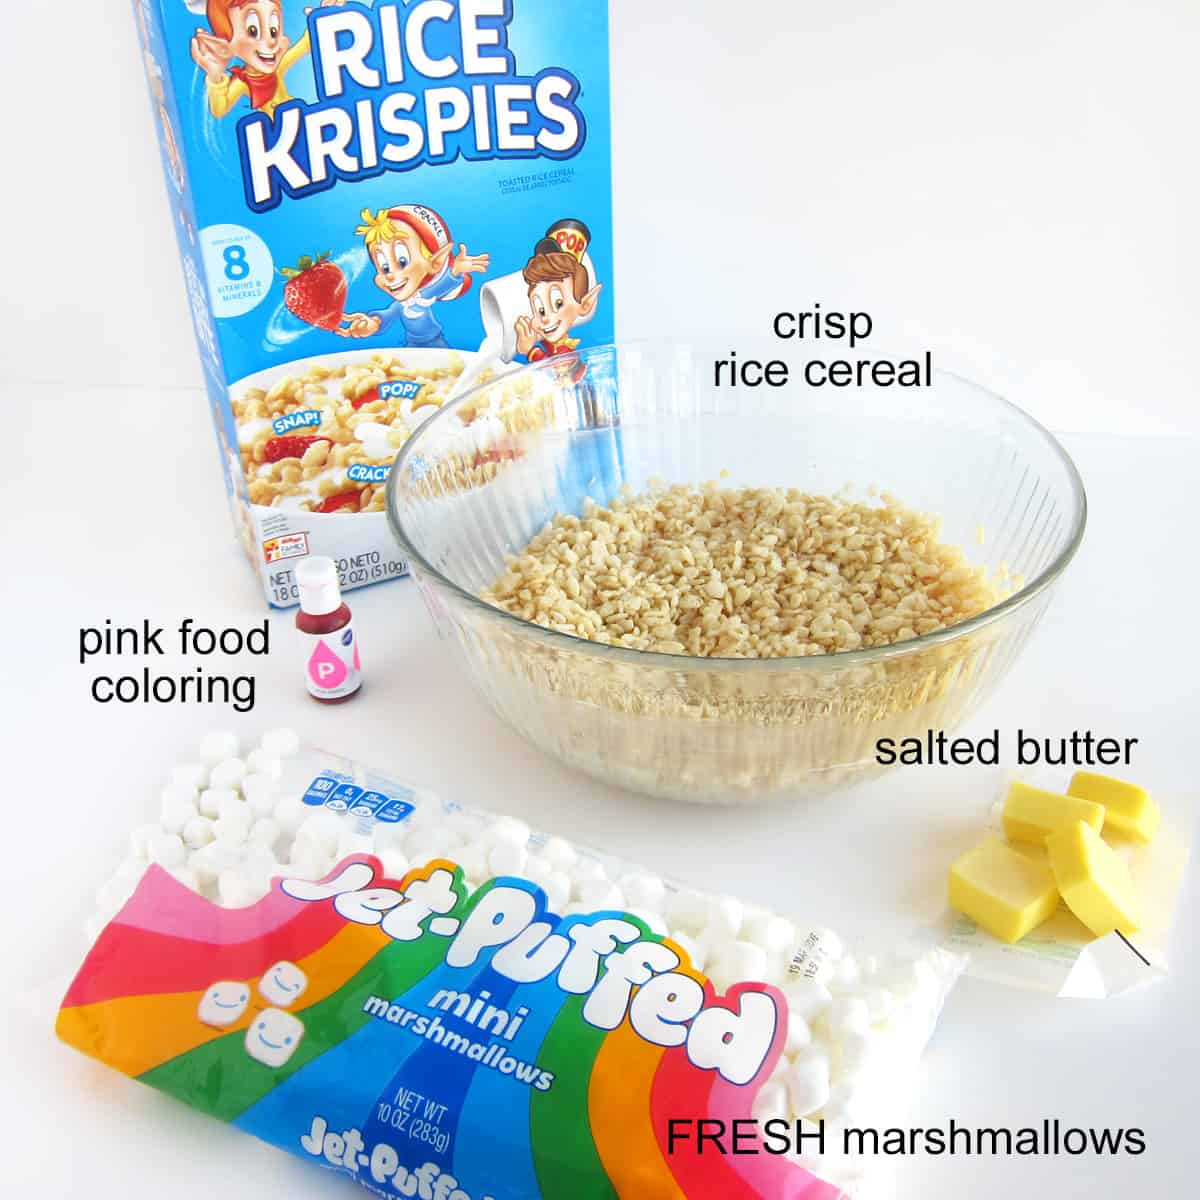 pink rice krispie treat ingredients: butter, marshmallows, crisp rice cereal, and pink food coloring